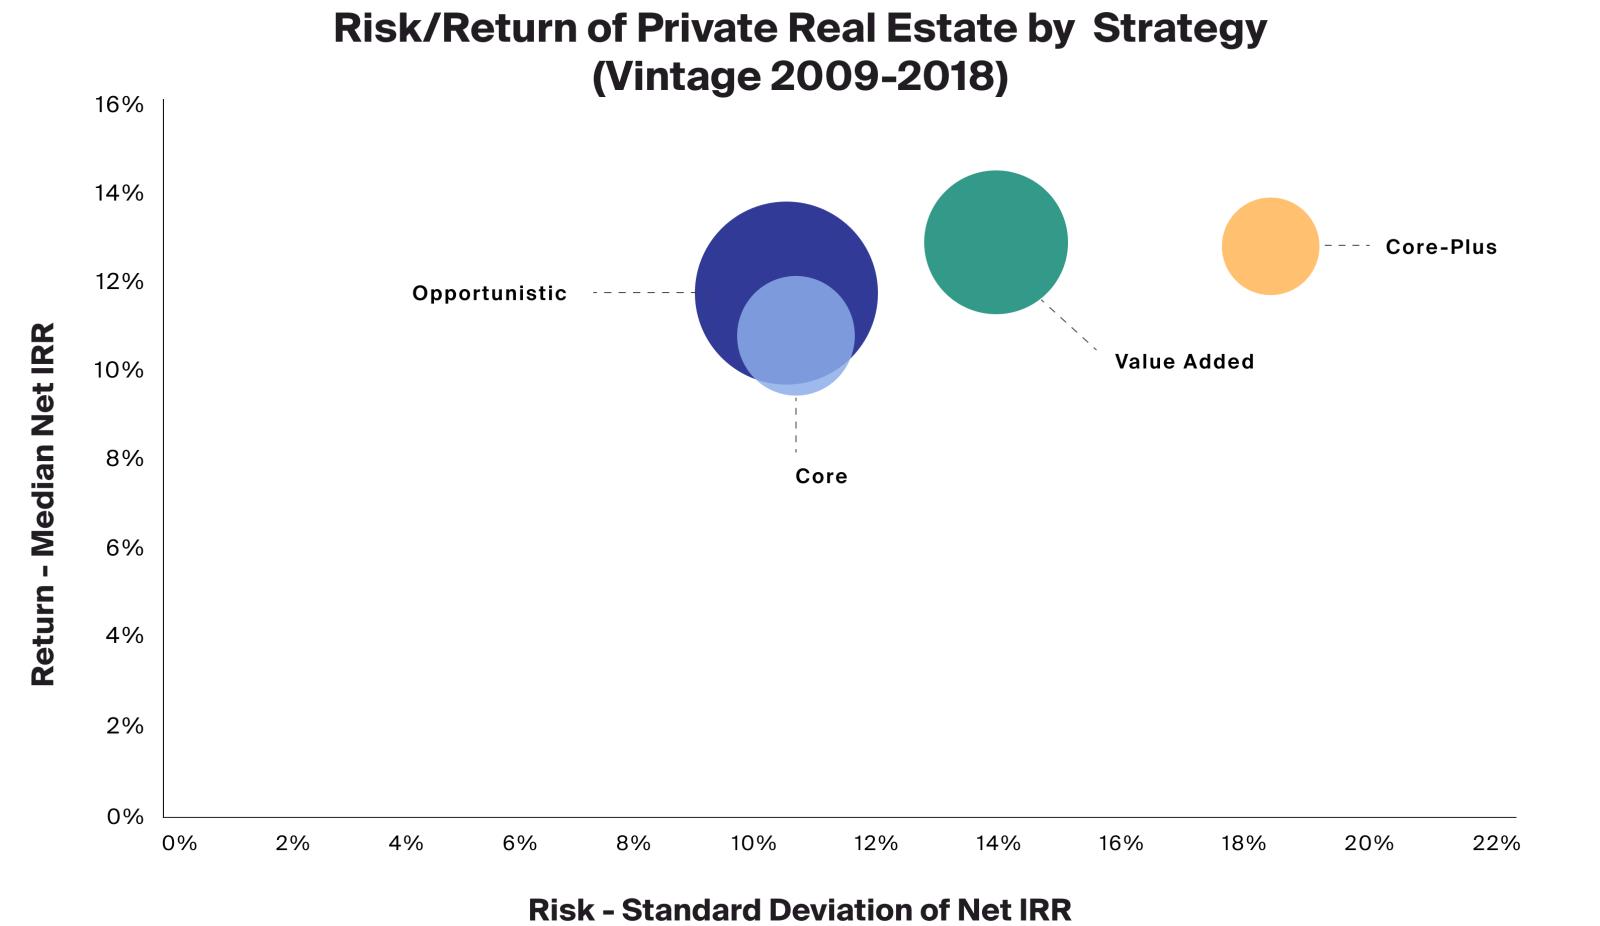 Exhibit 3: Private real estate strategies exhibit a range of risk and return profiles